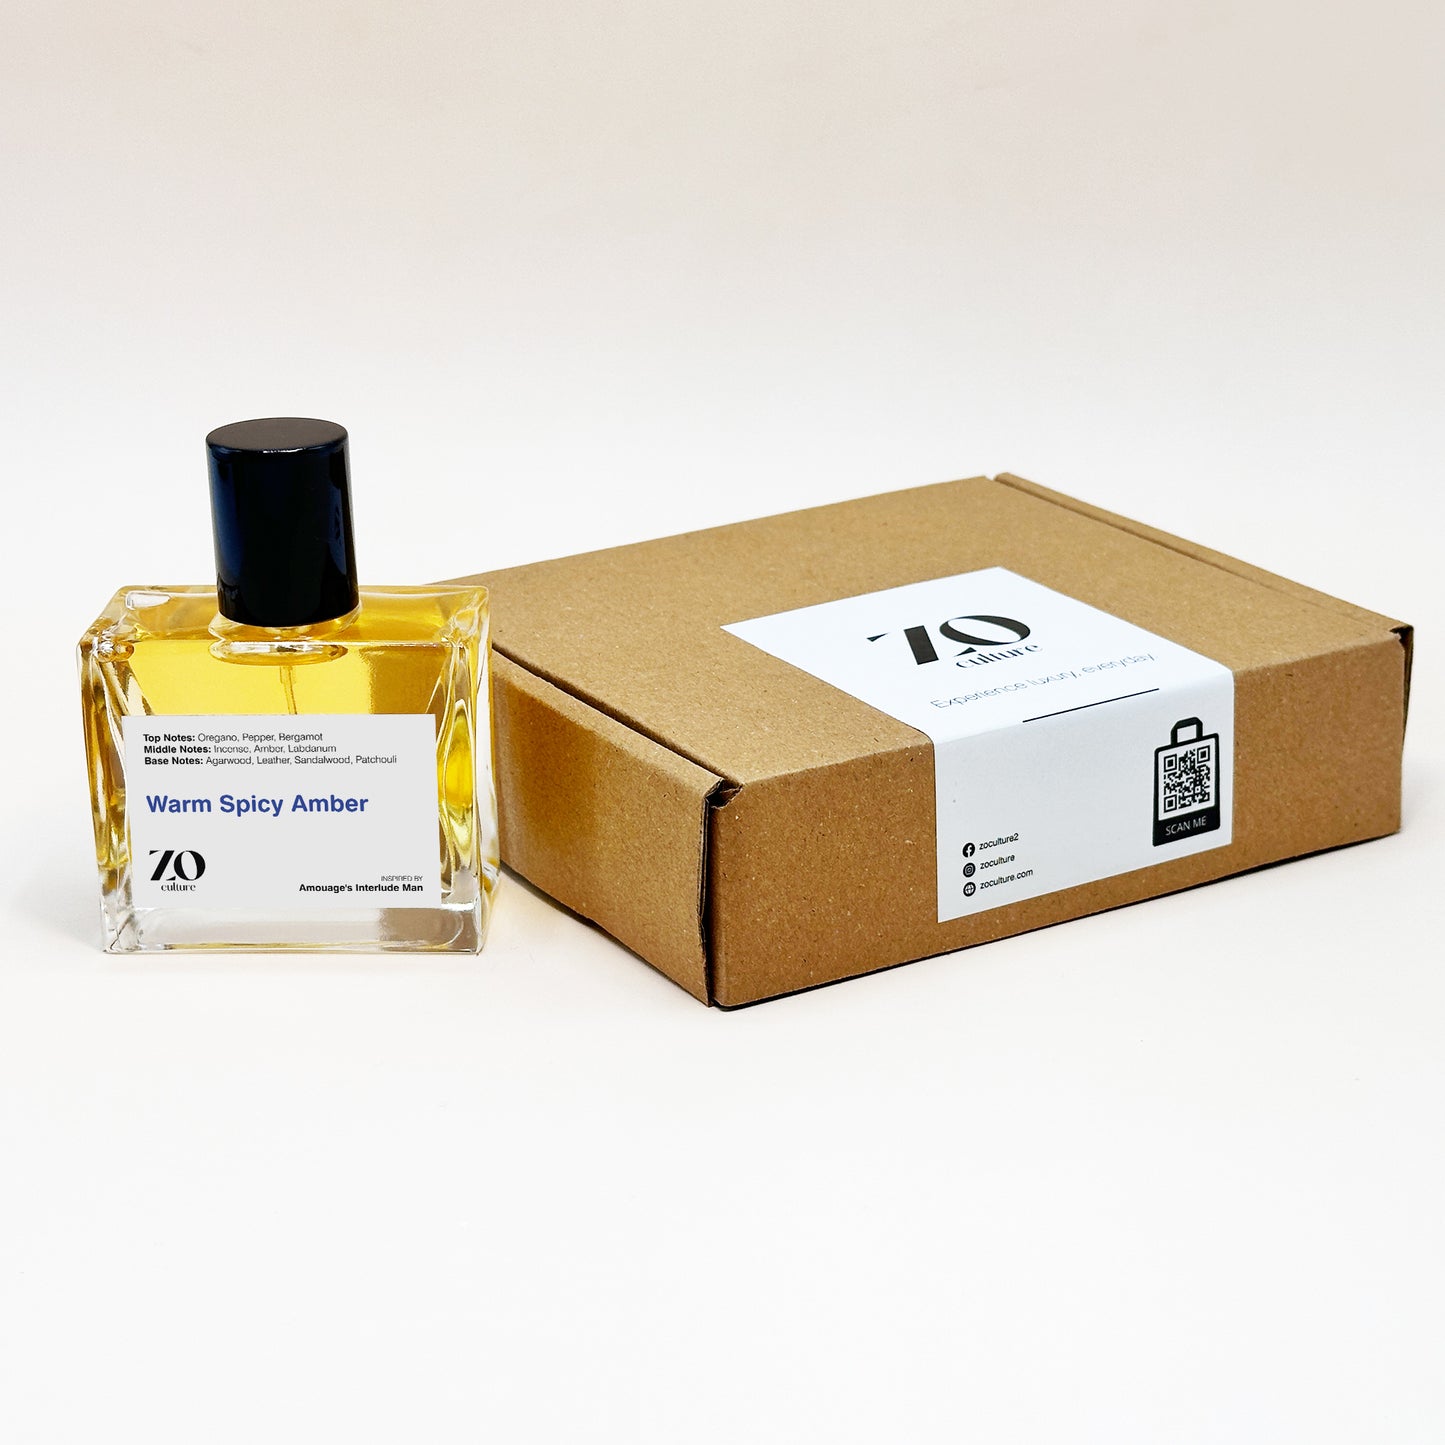 Men Perfume Warm Spicy Amber - Inspired by Amouage's Interlude Man ZoCulture